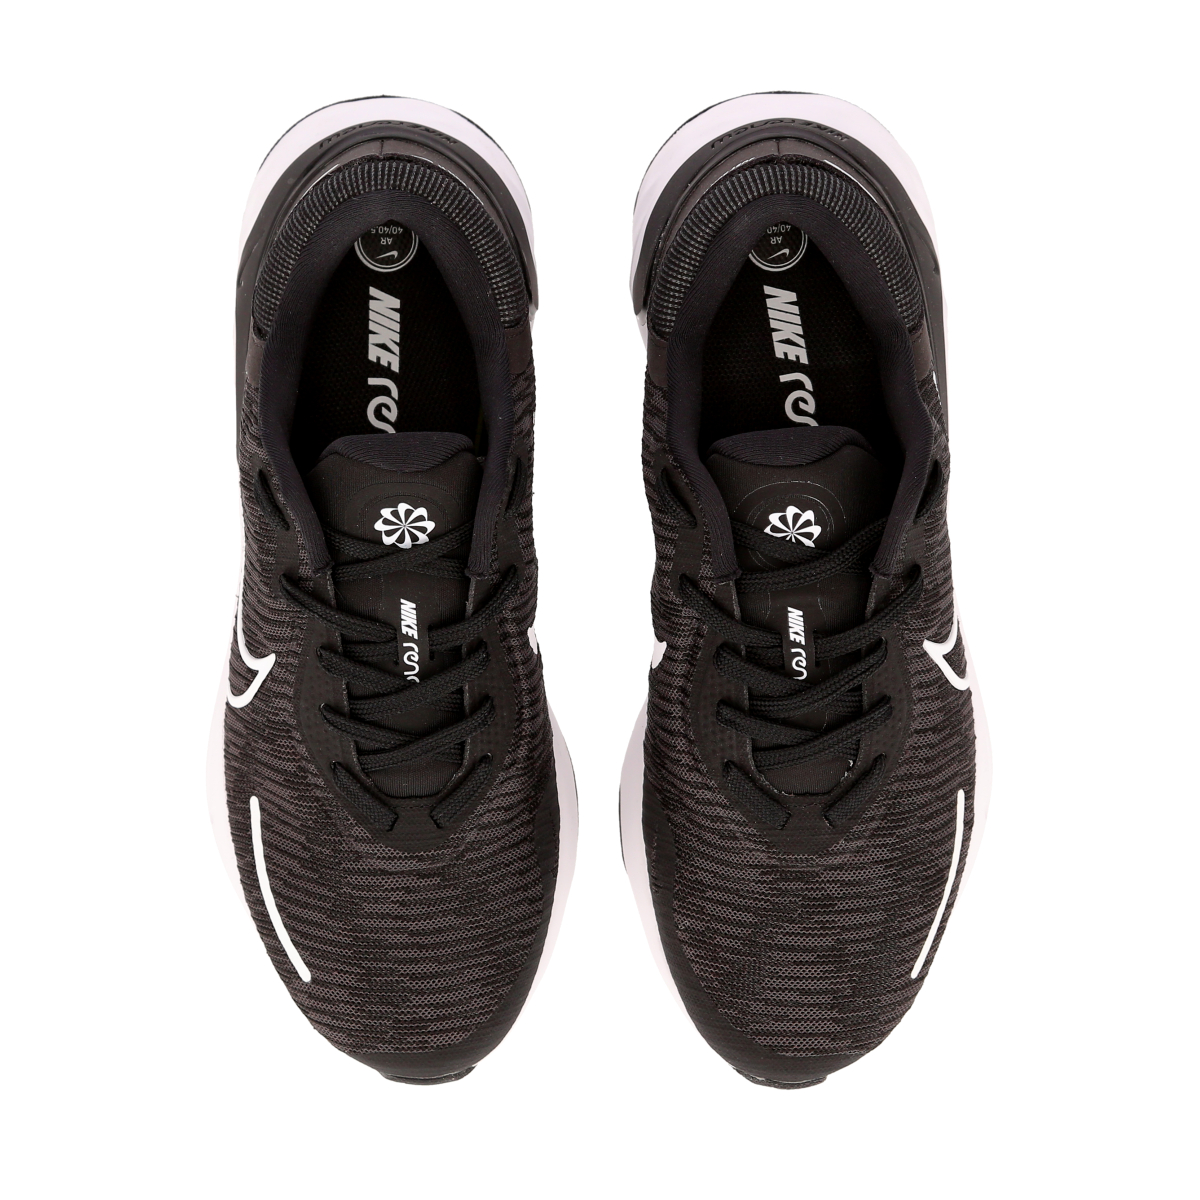 Zapatillas Running Nike Renew Run 4 Hombre,  image number null